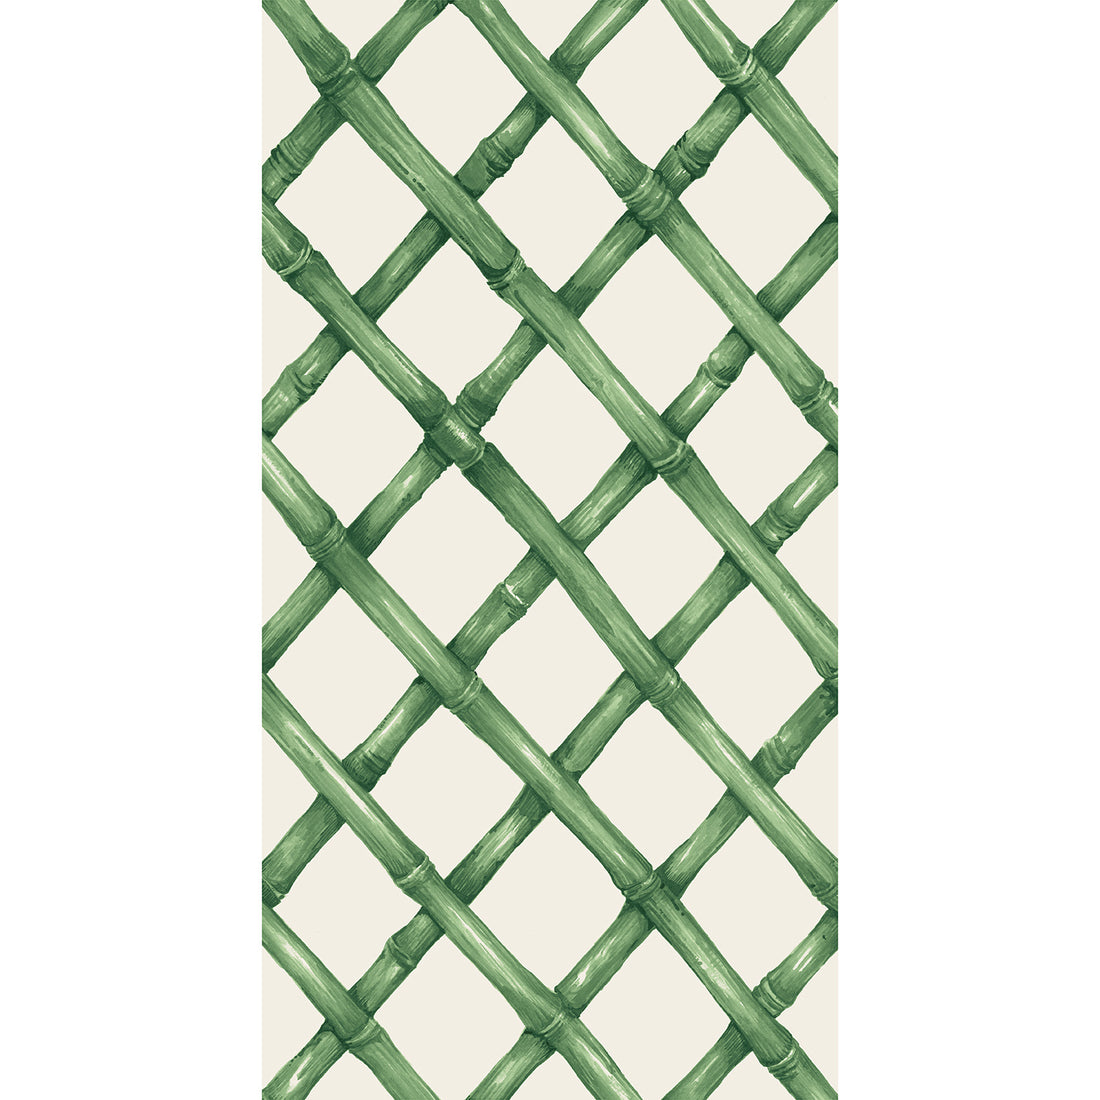 A Hester &amp; Cook Green Lattice Napkin, featuring a green and white lattice pattern on a white background, resembling a cocktail napkin.